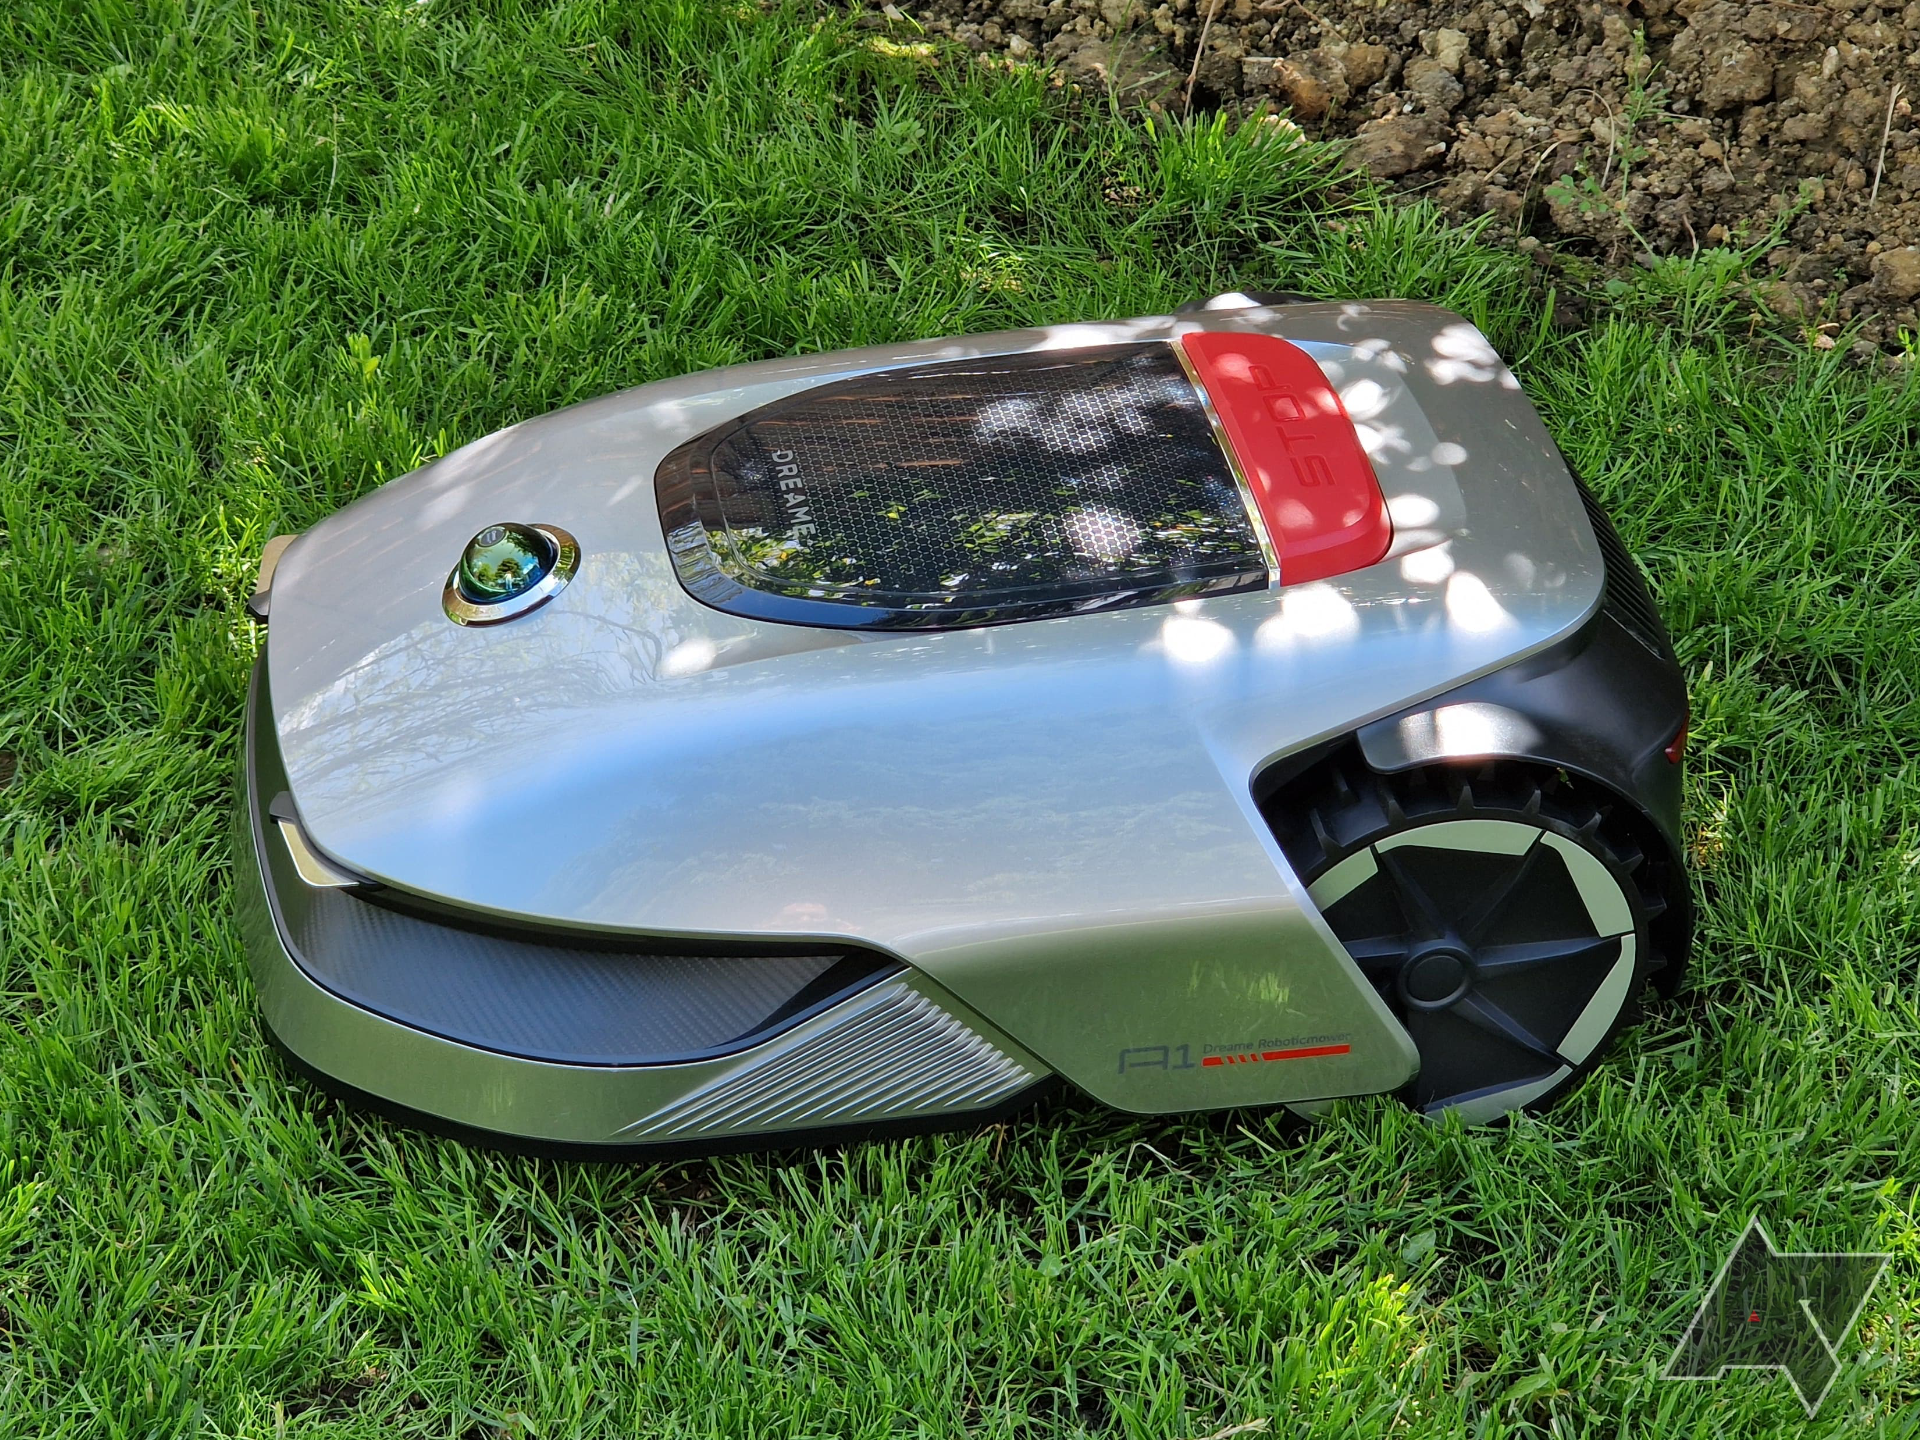 Side view of the Dreametech Robotic Mower A1 on grass